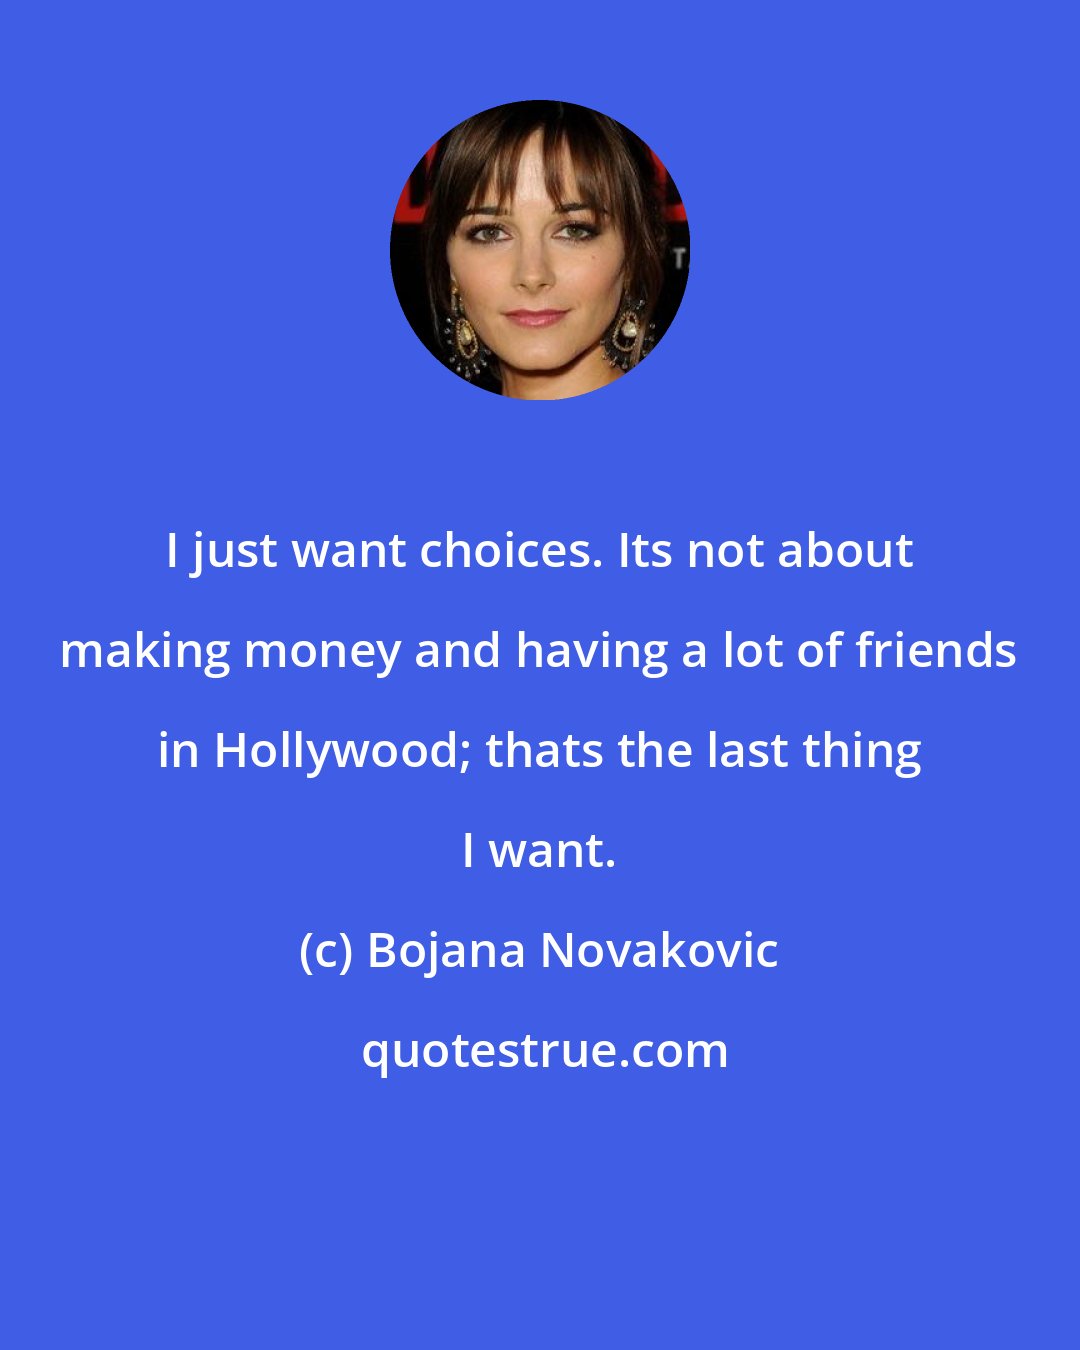 Bojana Novakovic: I just want choices. Its not about making money and having a lot of friends in Hollywood; thats the last thing I want.